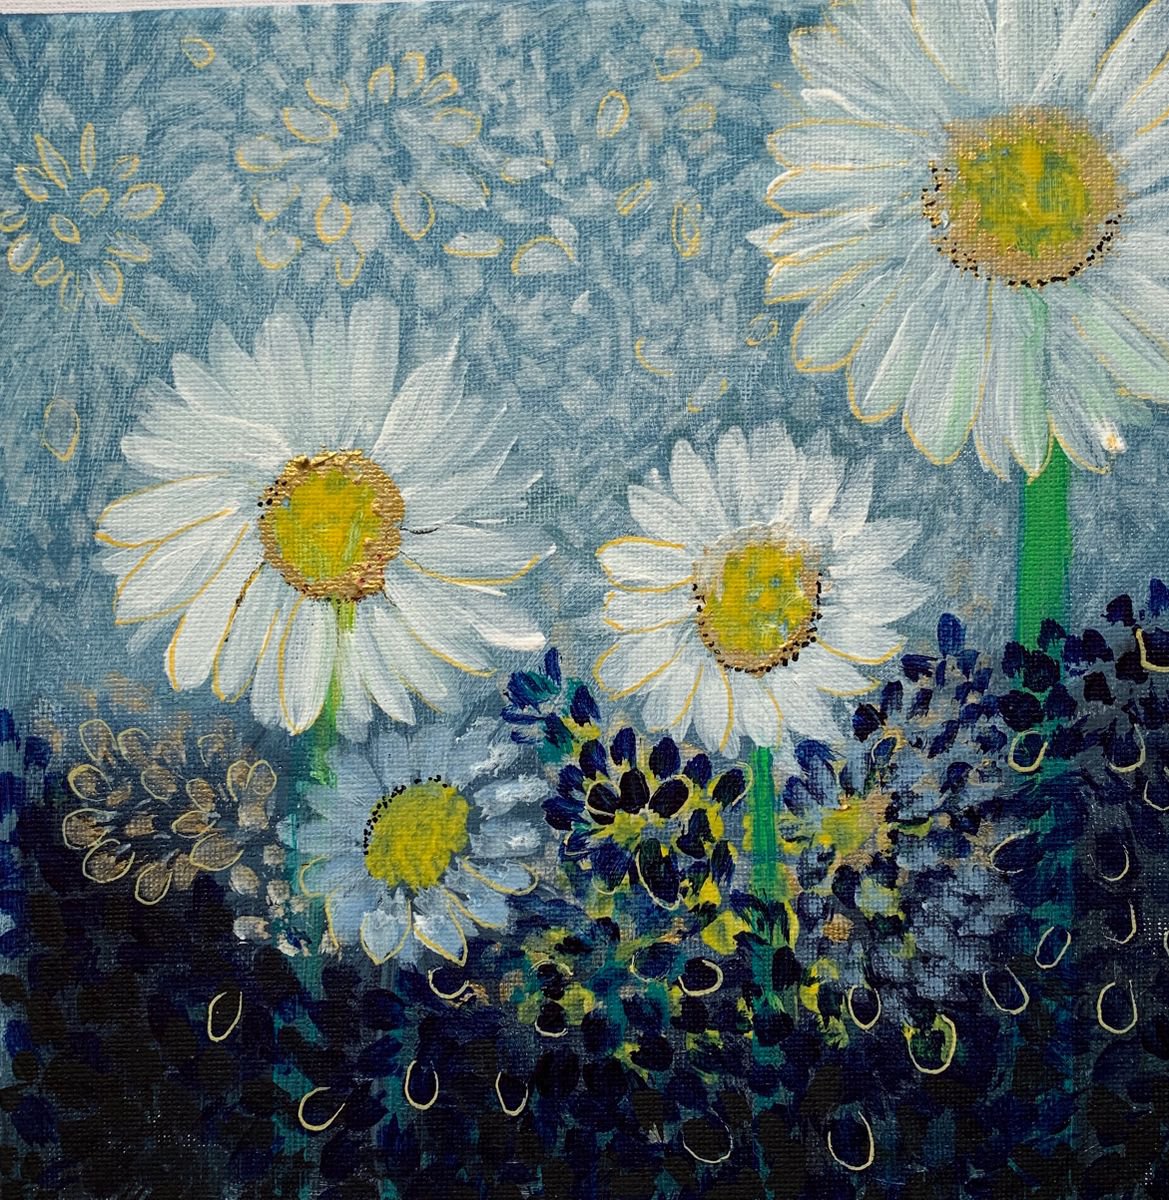 Daisies, Flower Paintings, Floral Artwork For Sale, Original Acrylic Painting, Home Decor by Kumi Muttu